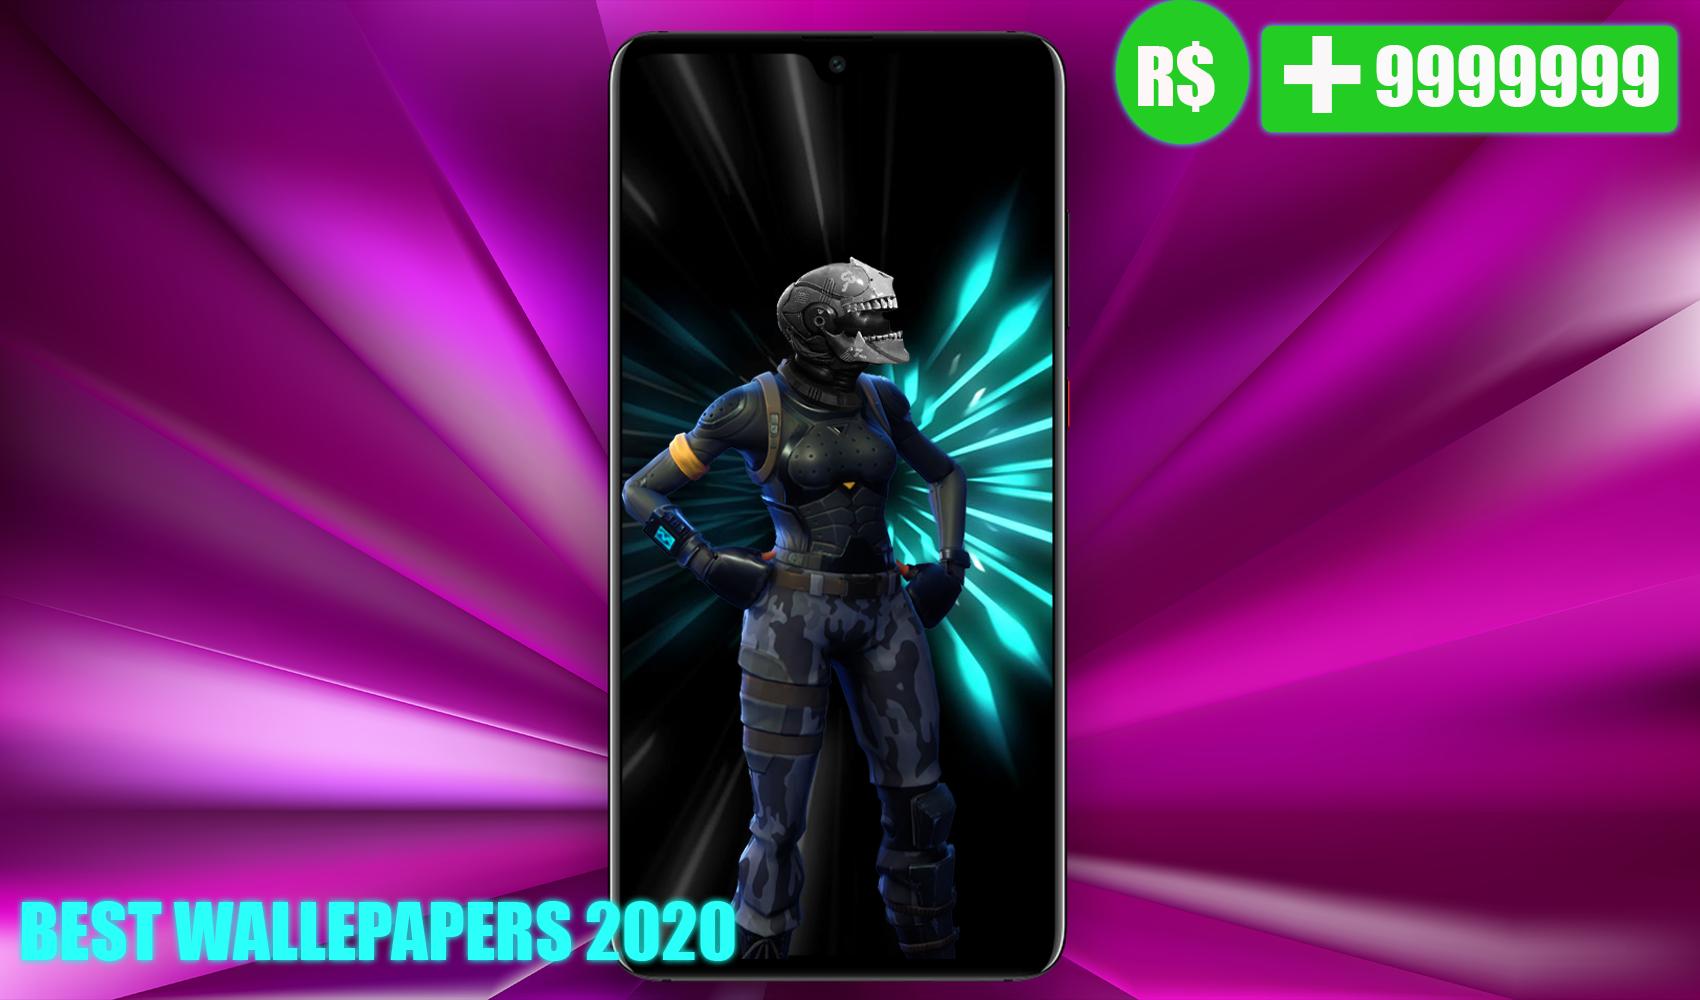 Fort Wallpapers Free Robux And Rbx Calculator For Android Apk Download - robuxgenerator download apkpure